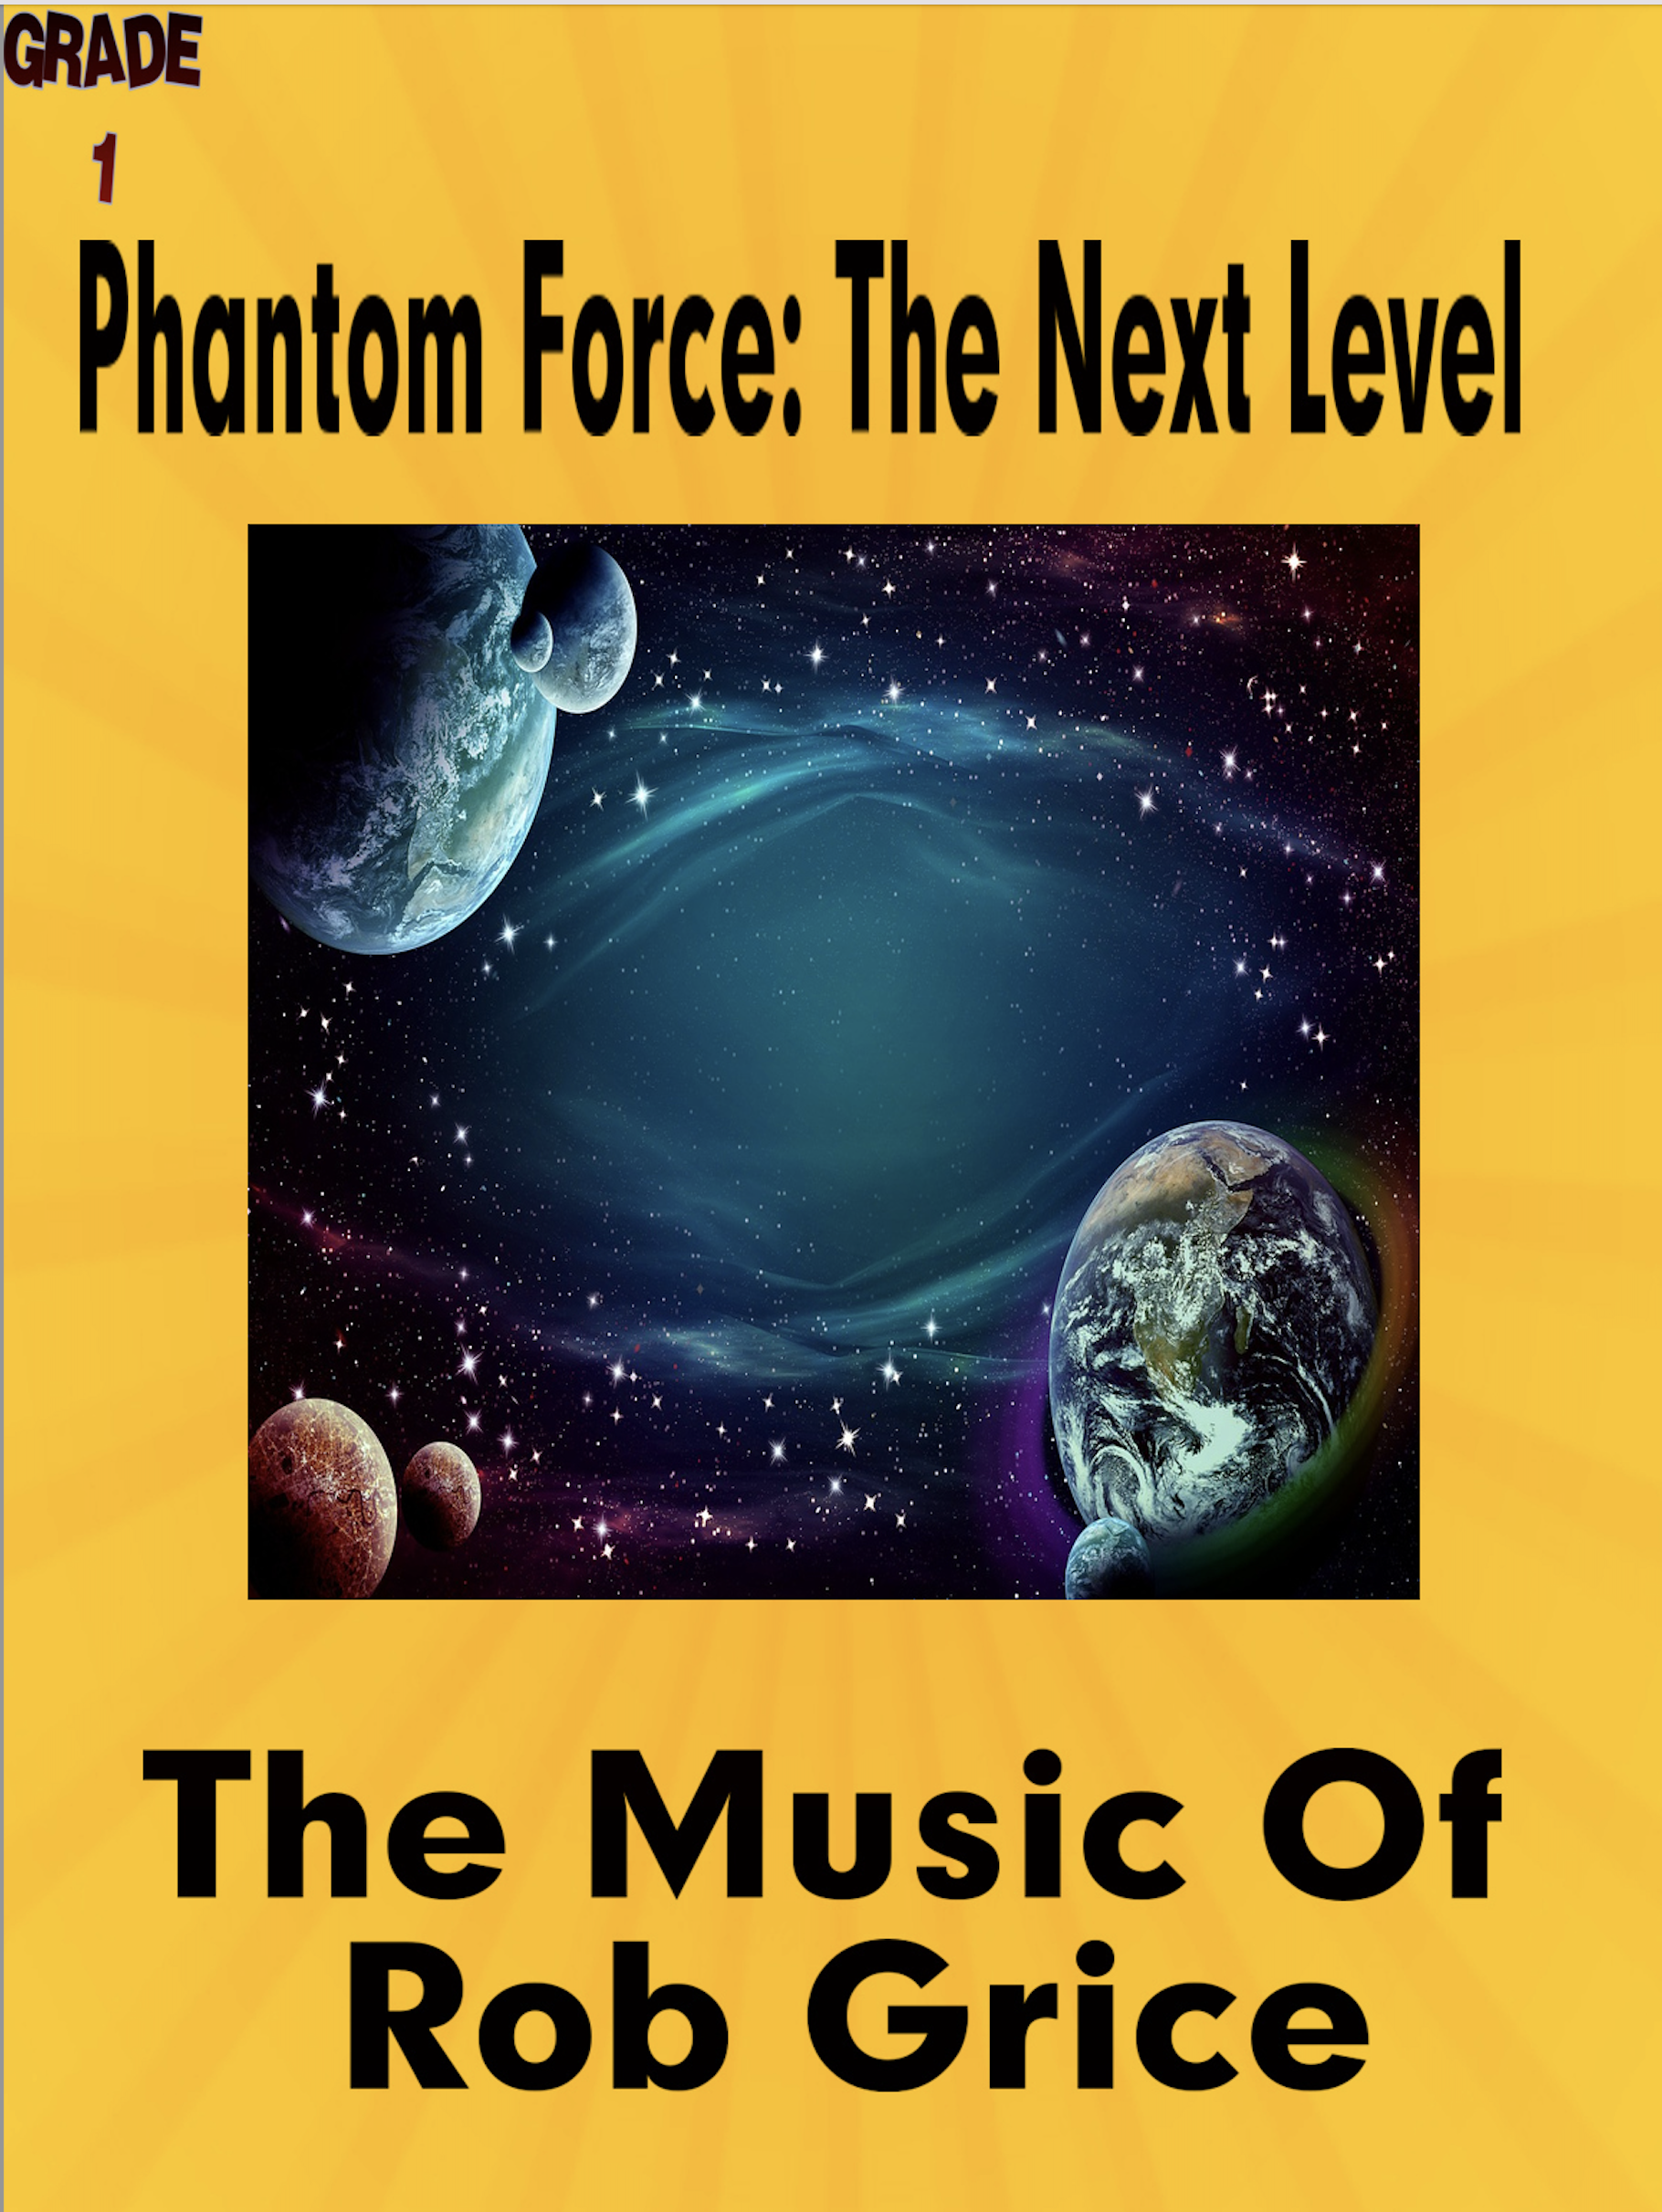 Phantom Force: The Next Level (Score Only) by Rob Grice